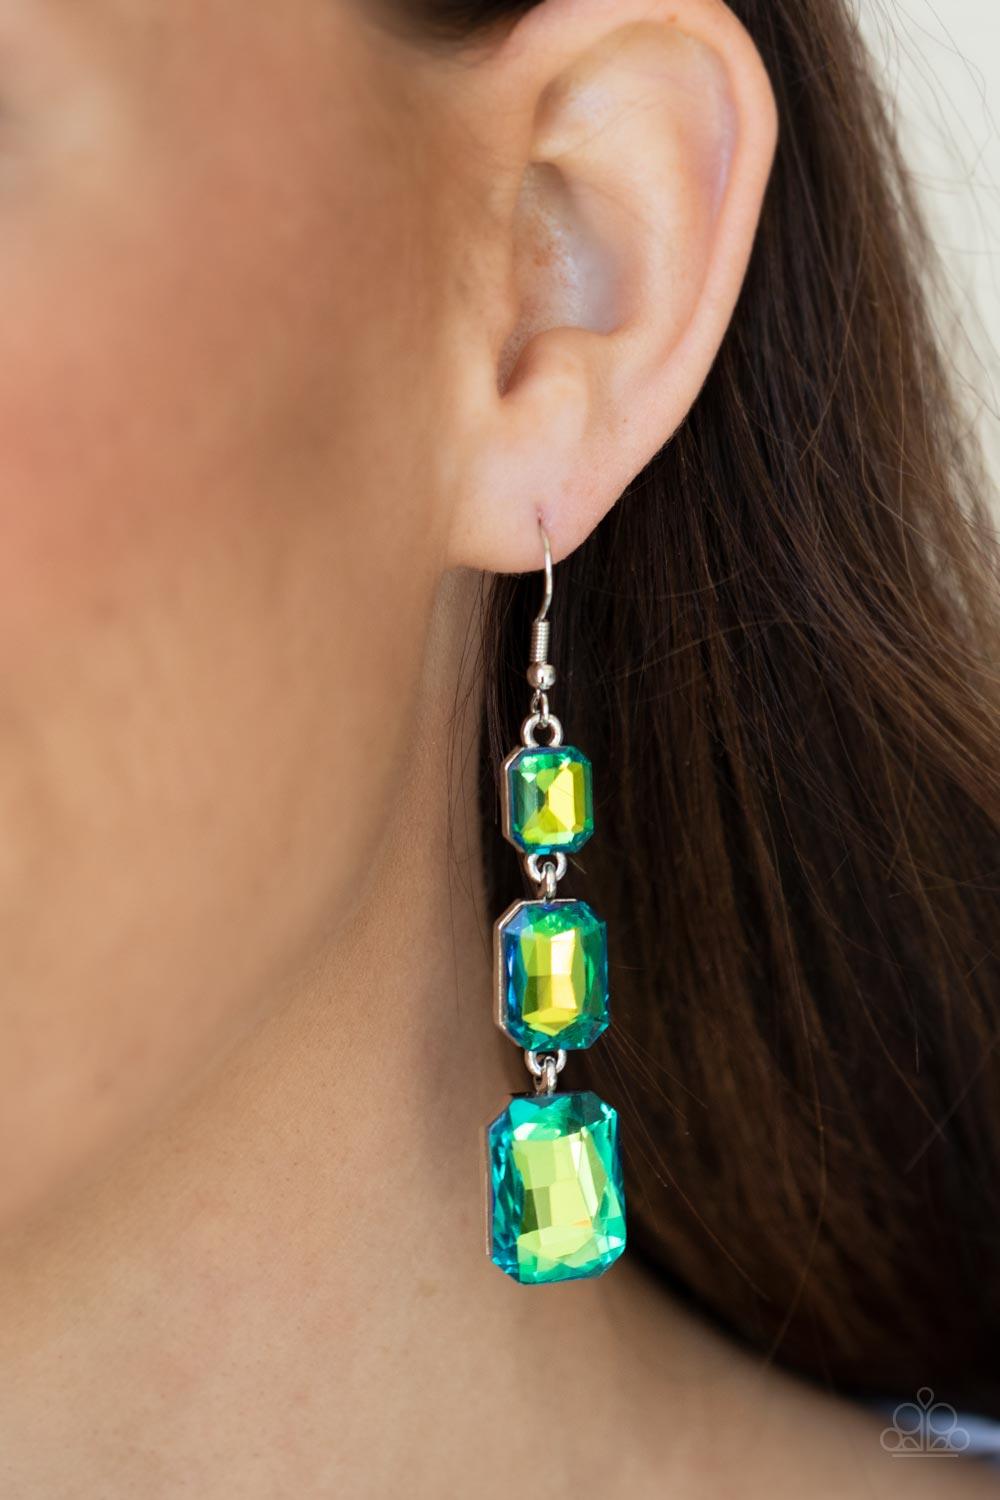 Paparazzi Accessories Cosmic Red Carpet - Green Featuring a dazzling green and gold UV shimmer, a trio of emerald-cut gems in graduating sizes is linked one below the other for a dramatic red carpet finish. Earring attaches to a standard fishhook fitting.